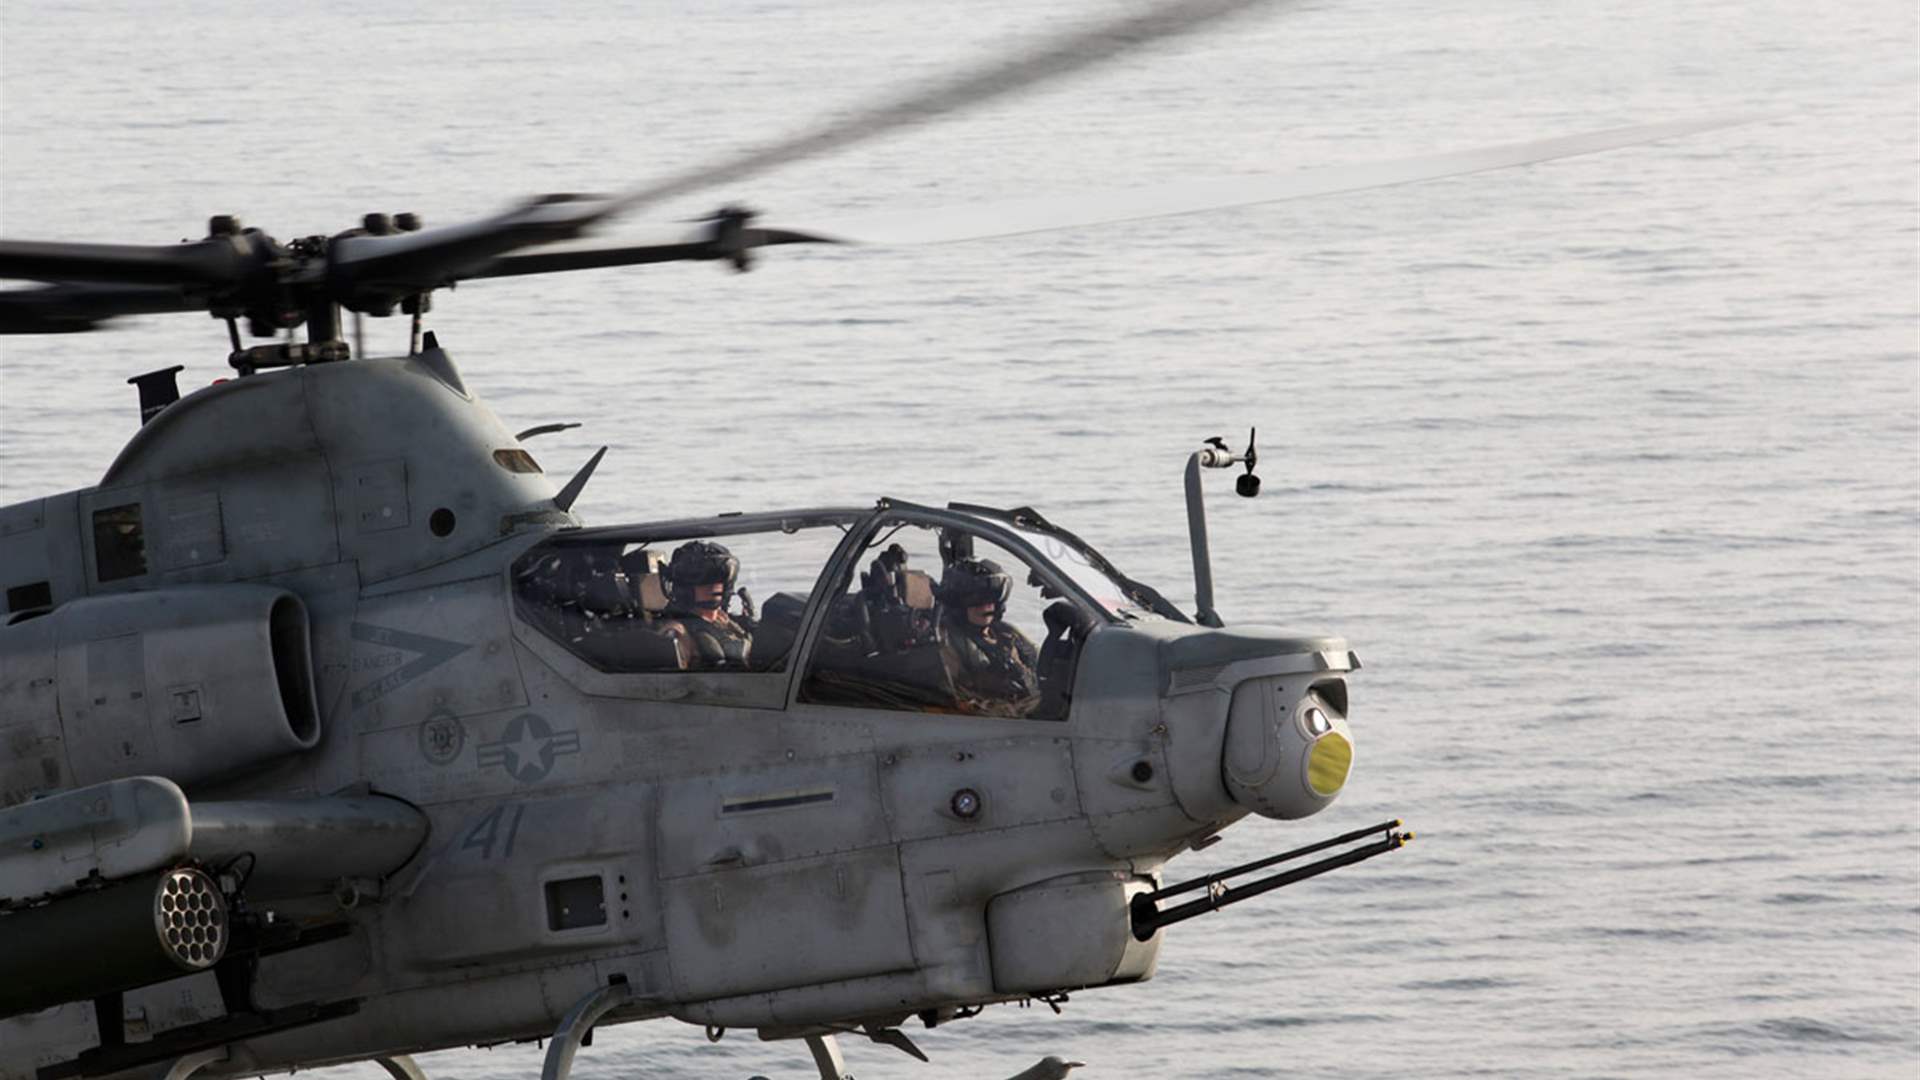 Iranian forces directs lasers at an American helicopter in the Gulf